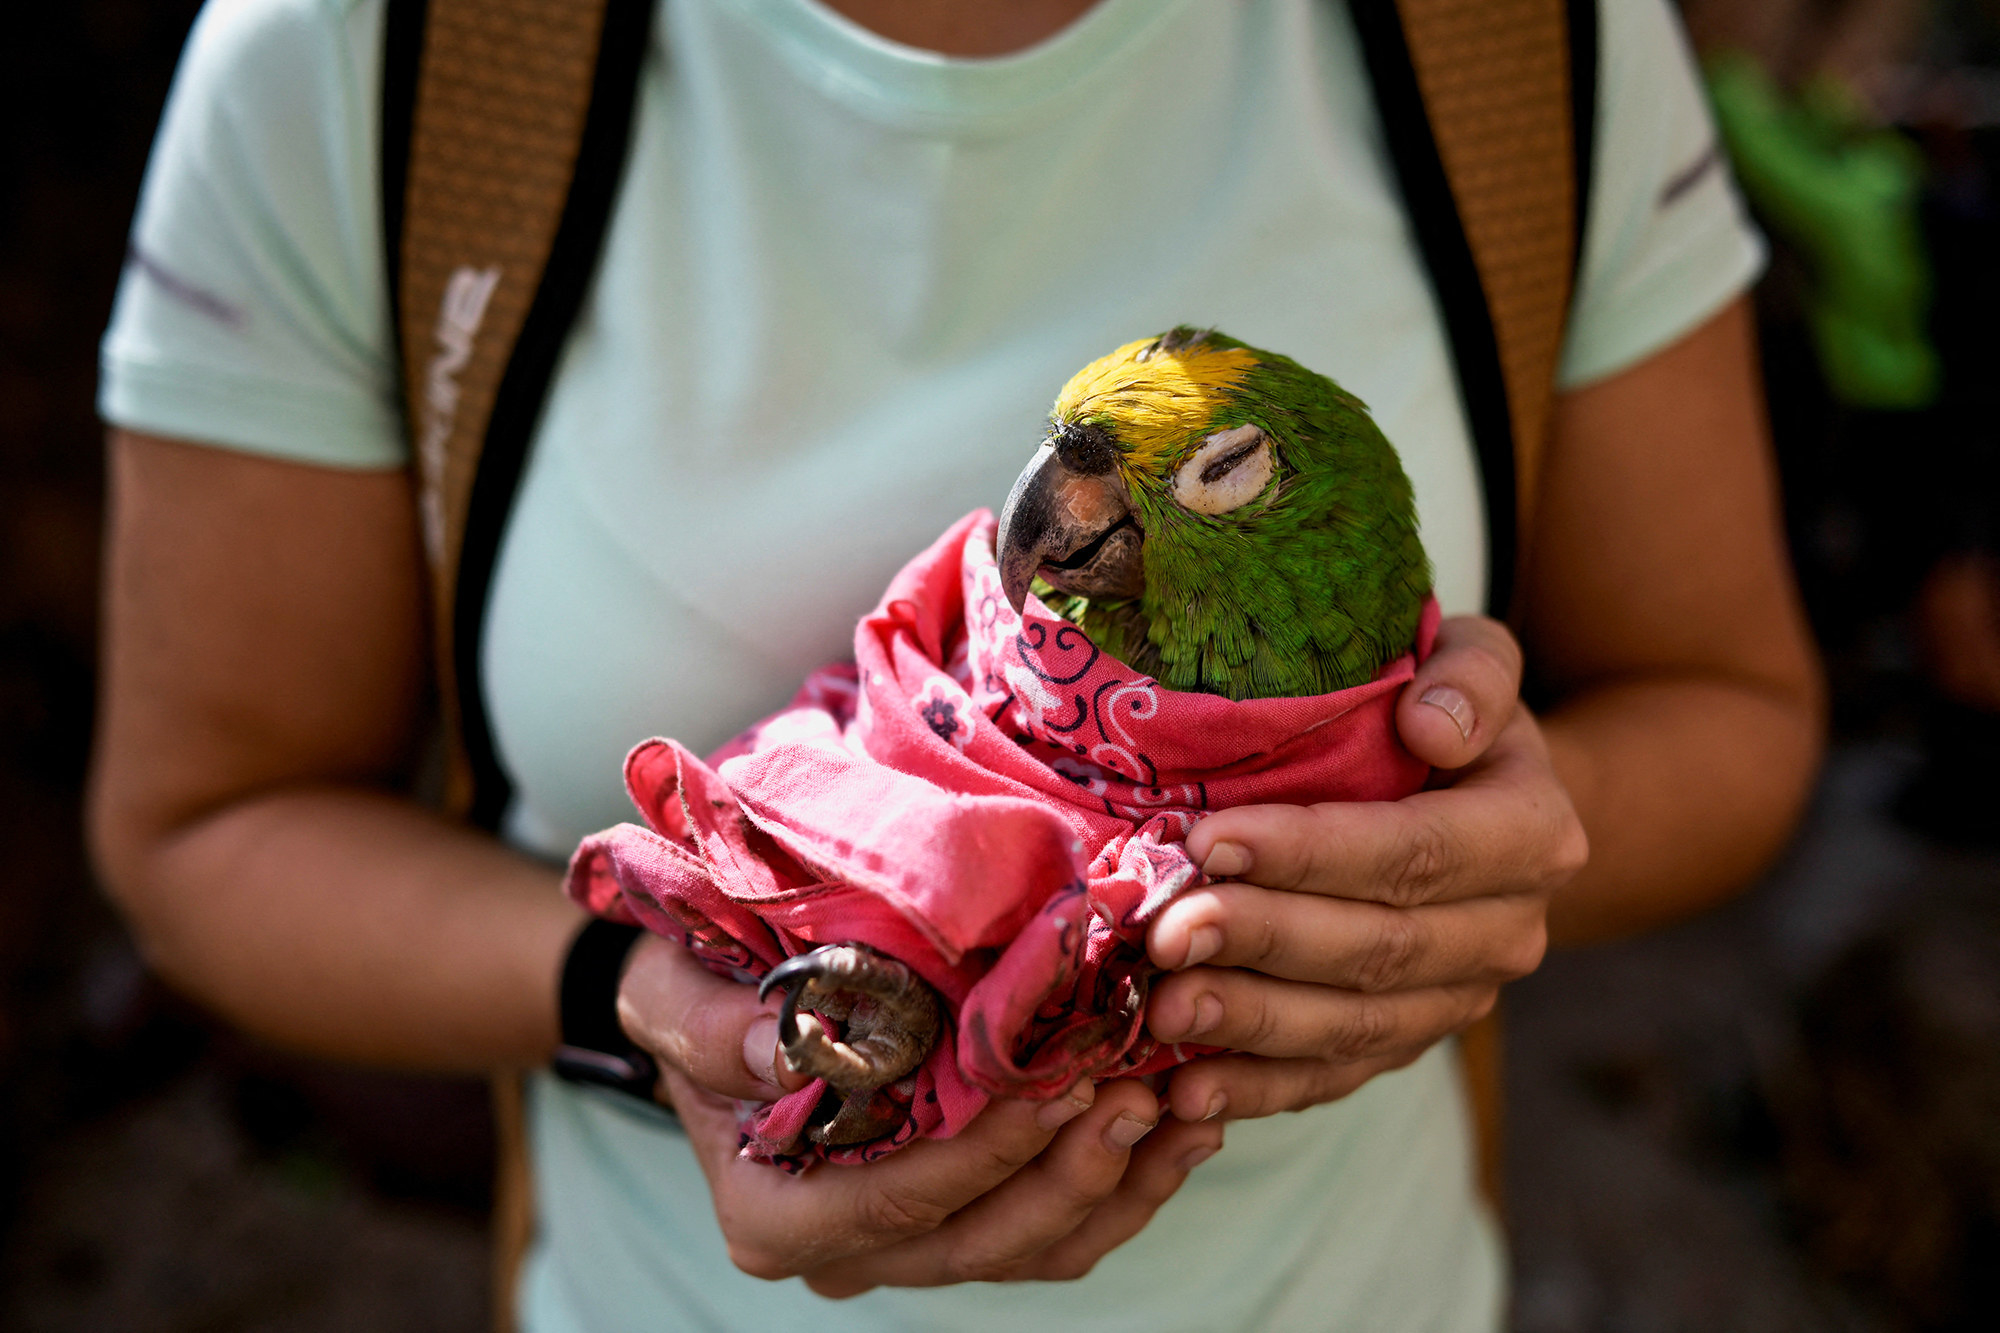 Someone holds a sleepy looking green macaw wrapped in a pink bandana